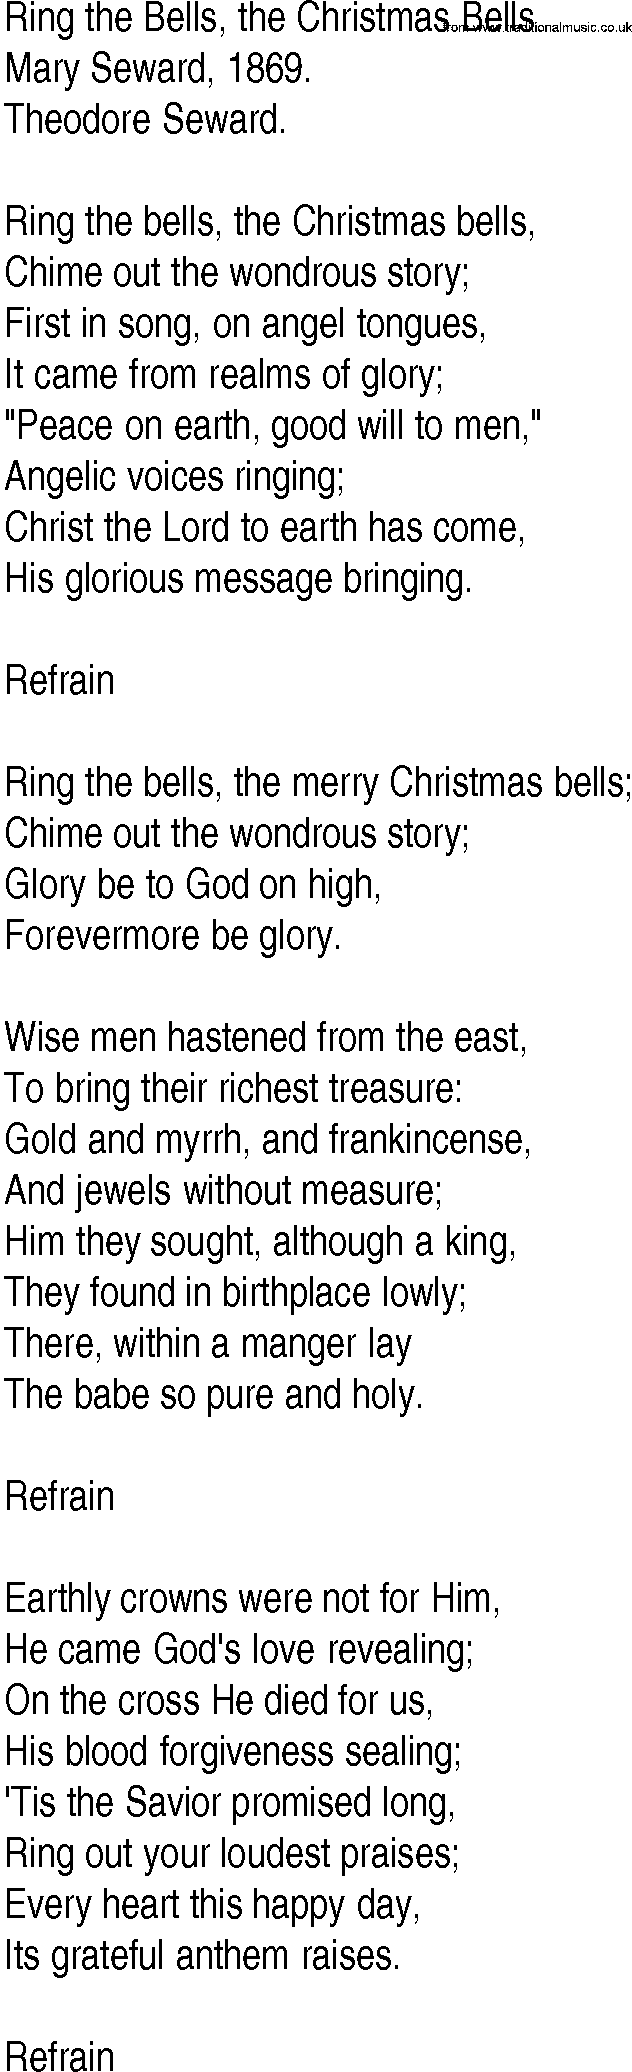 Hymn and Gospel Song: Ring the Bells, the Christmas Bells by Mary Seward lyrics